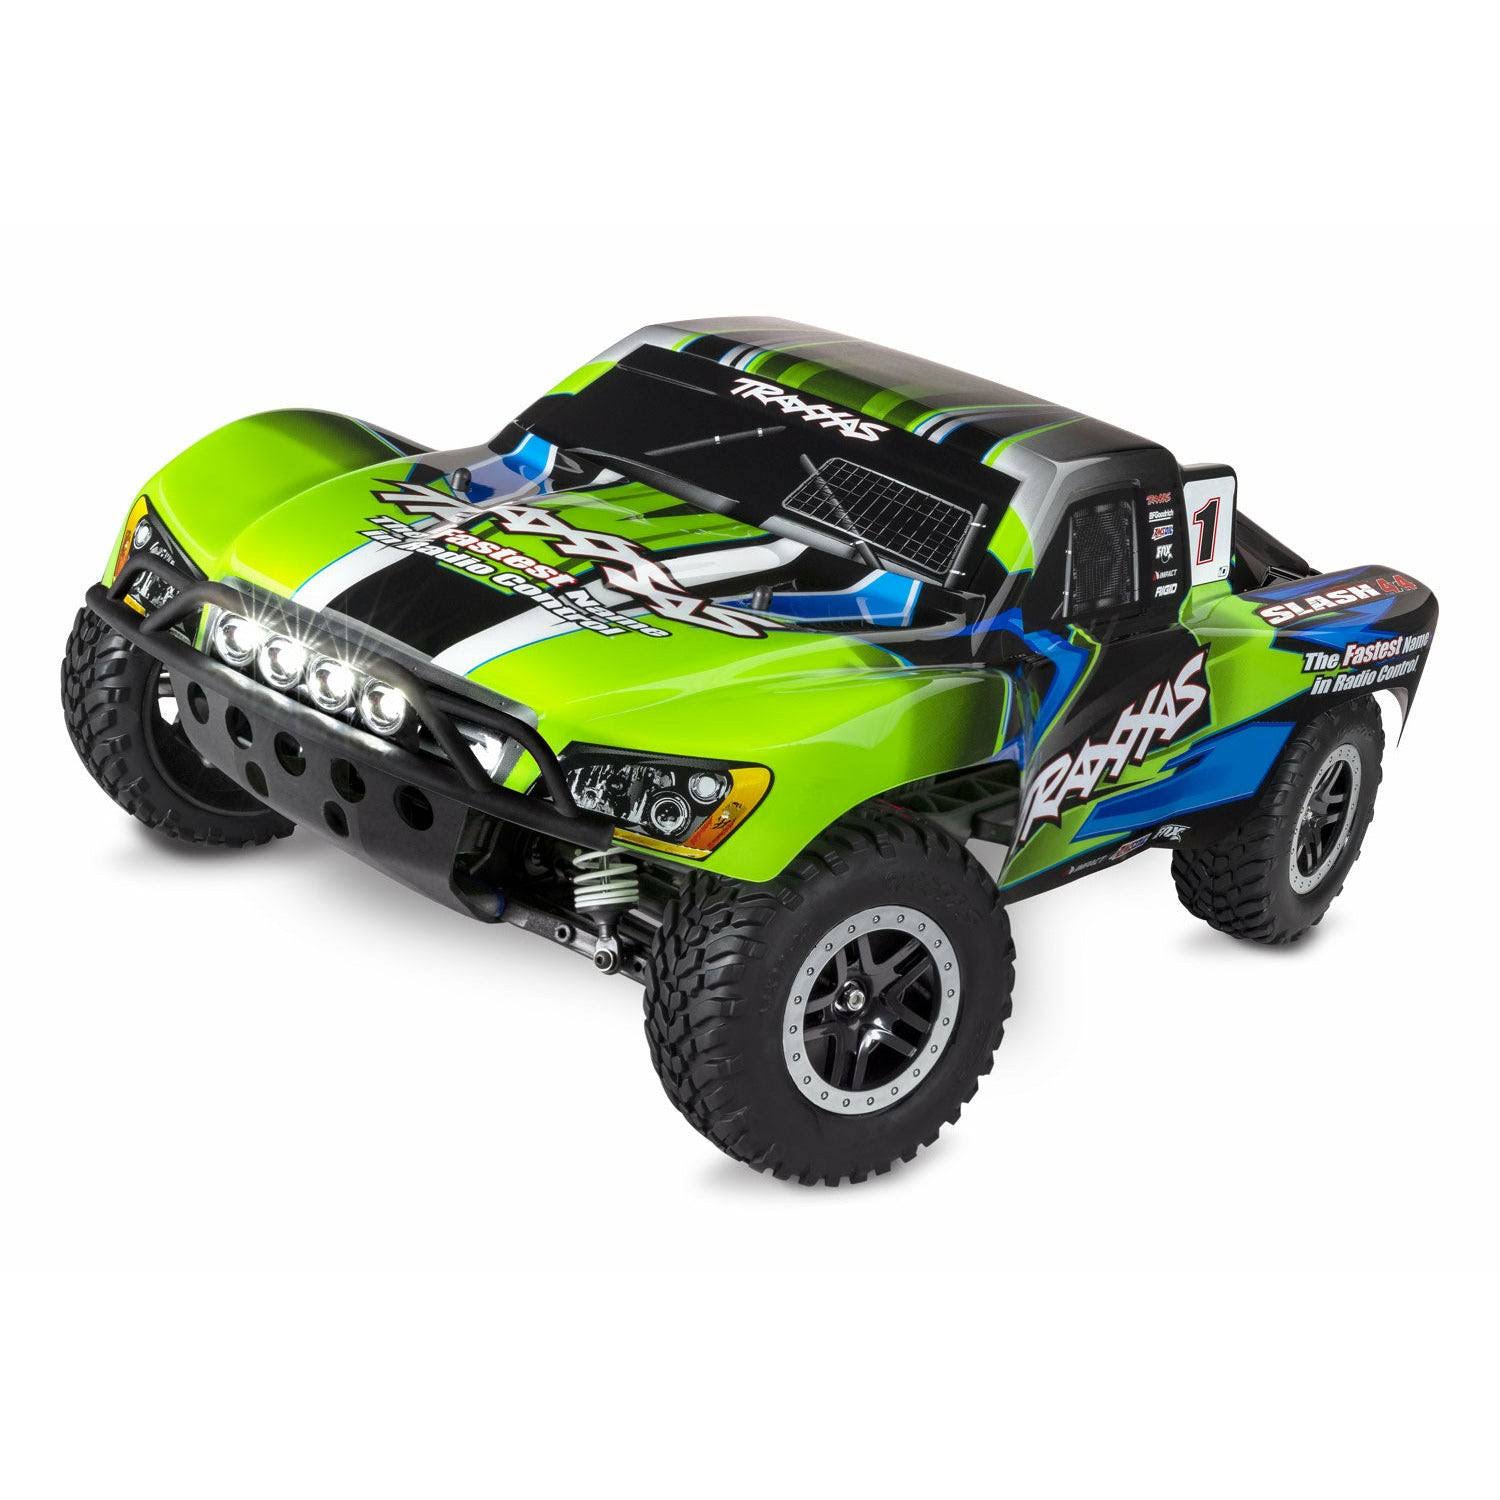 Traxxas Slash 4X4 1/10 4WD XL-5 RTR Short Course Truck No battery or Charger. Green